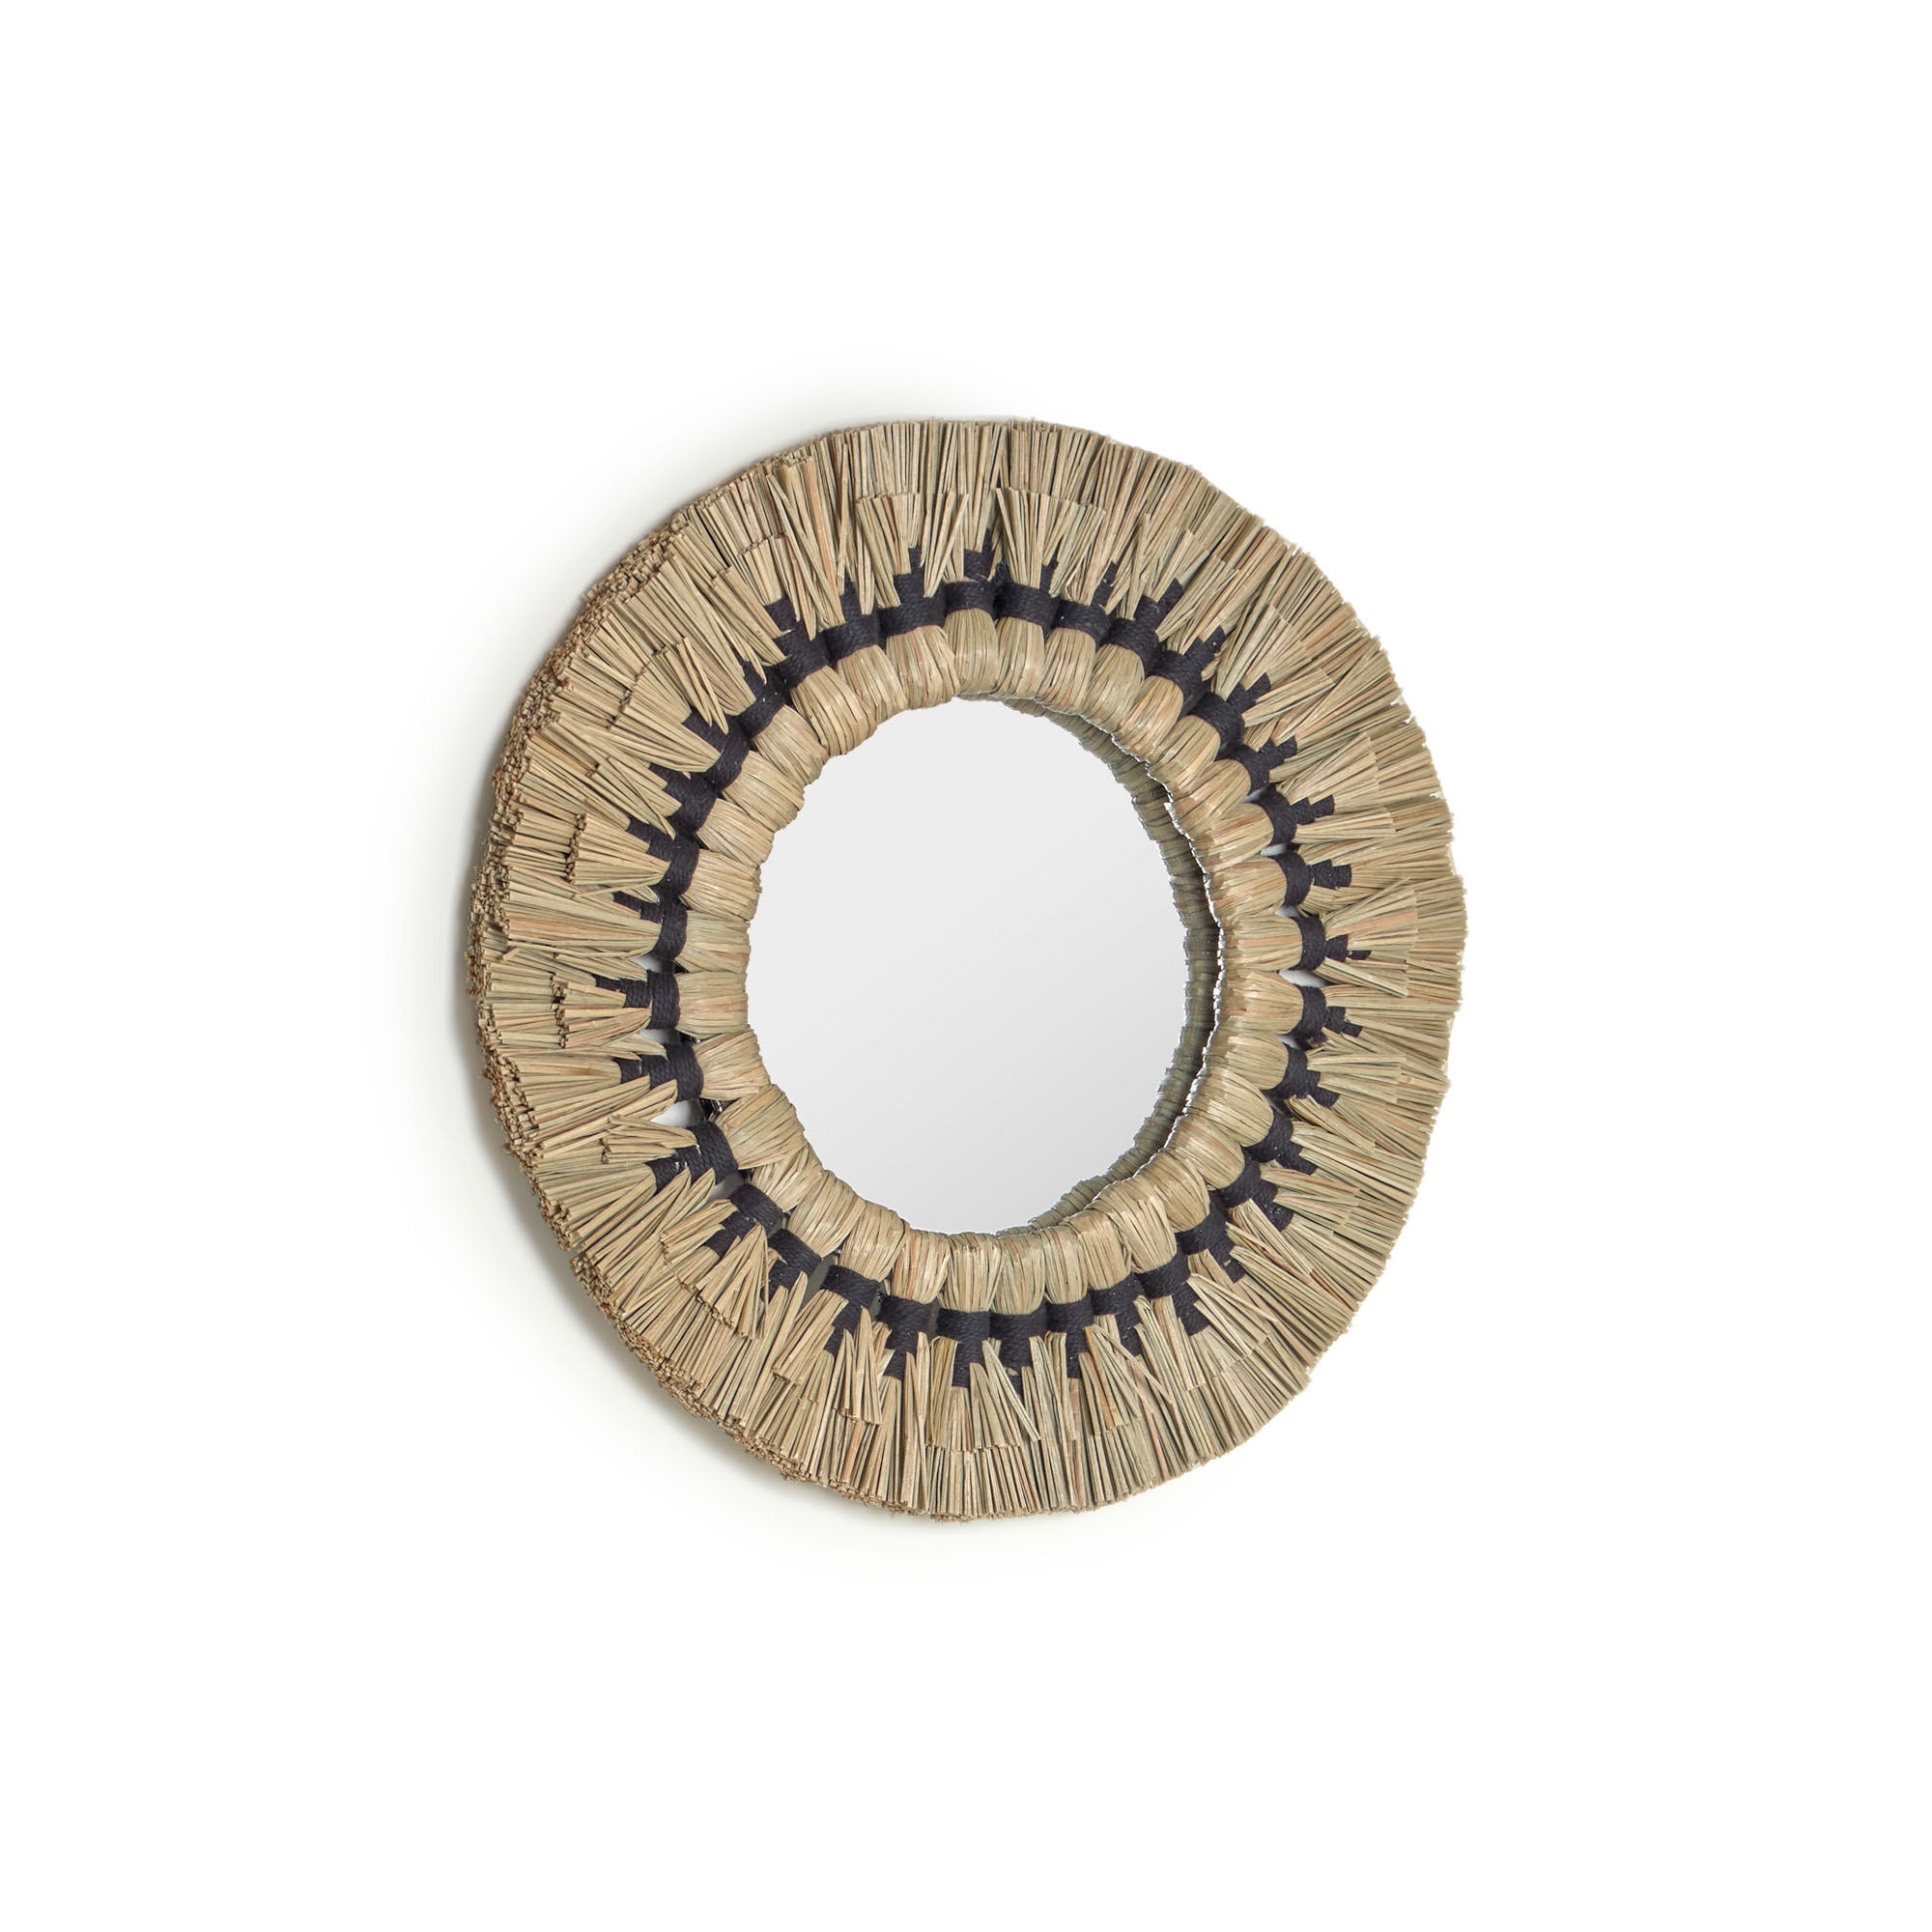 Kave Home Akila round mirror made from green natural fibres and black cotton cord, 40 cm